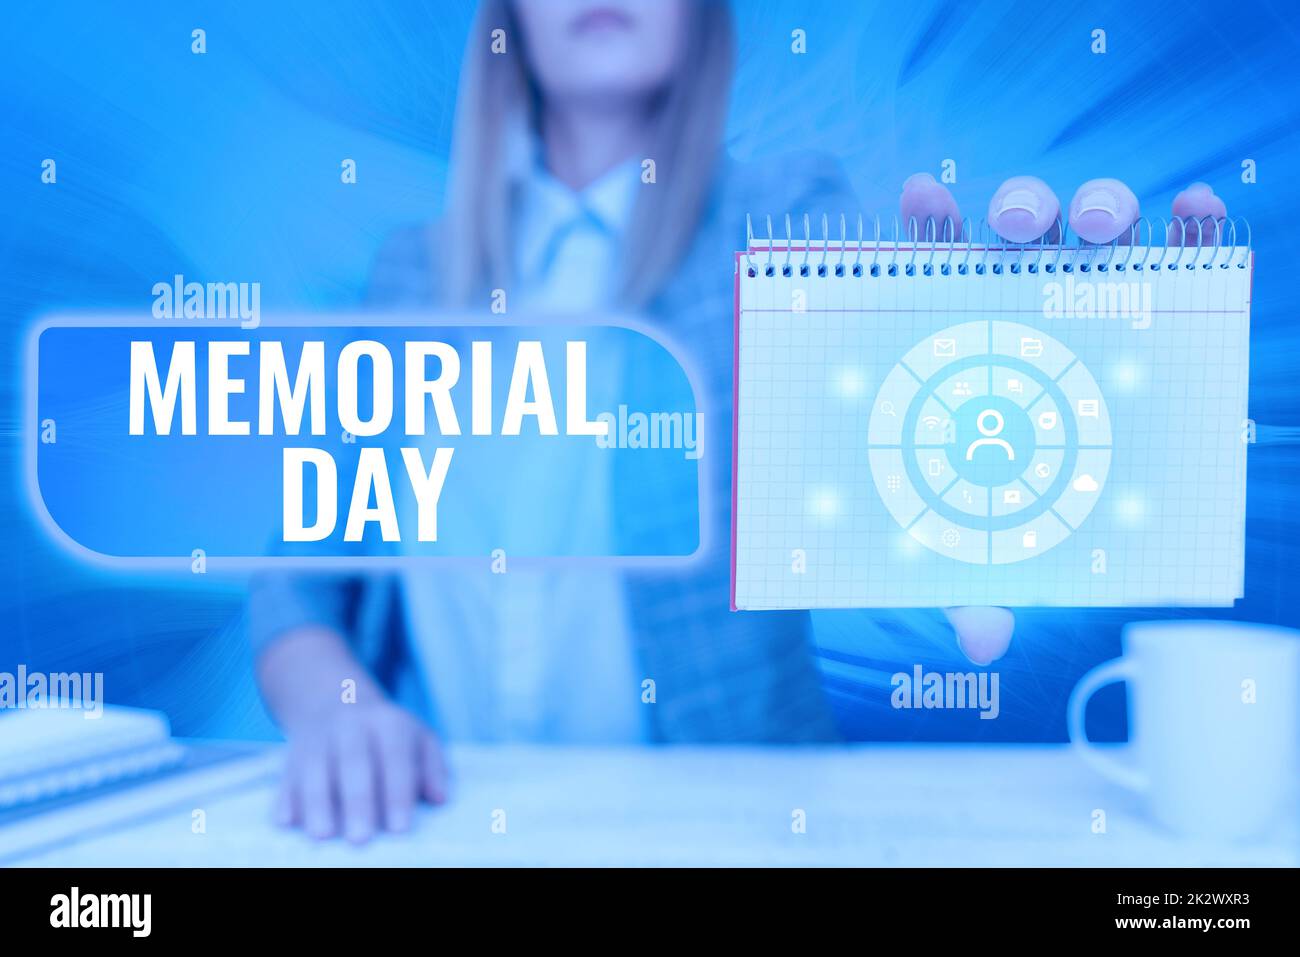 Sign displaying Memorial Day. Word Written on To honor and remembering those who died in military service Lady Pressing Screen Of Mobile Phone Showing The Futuristic Technology Stock Photo